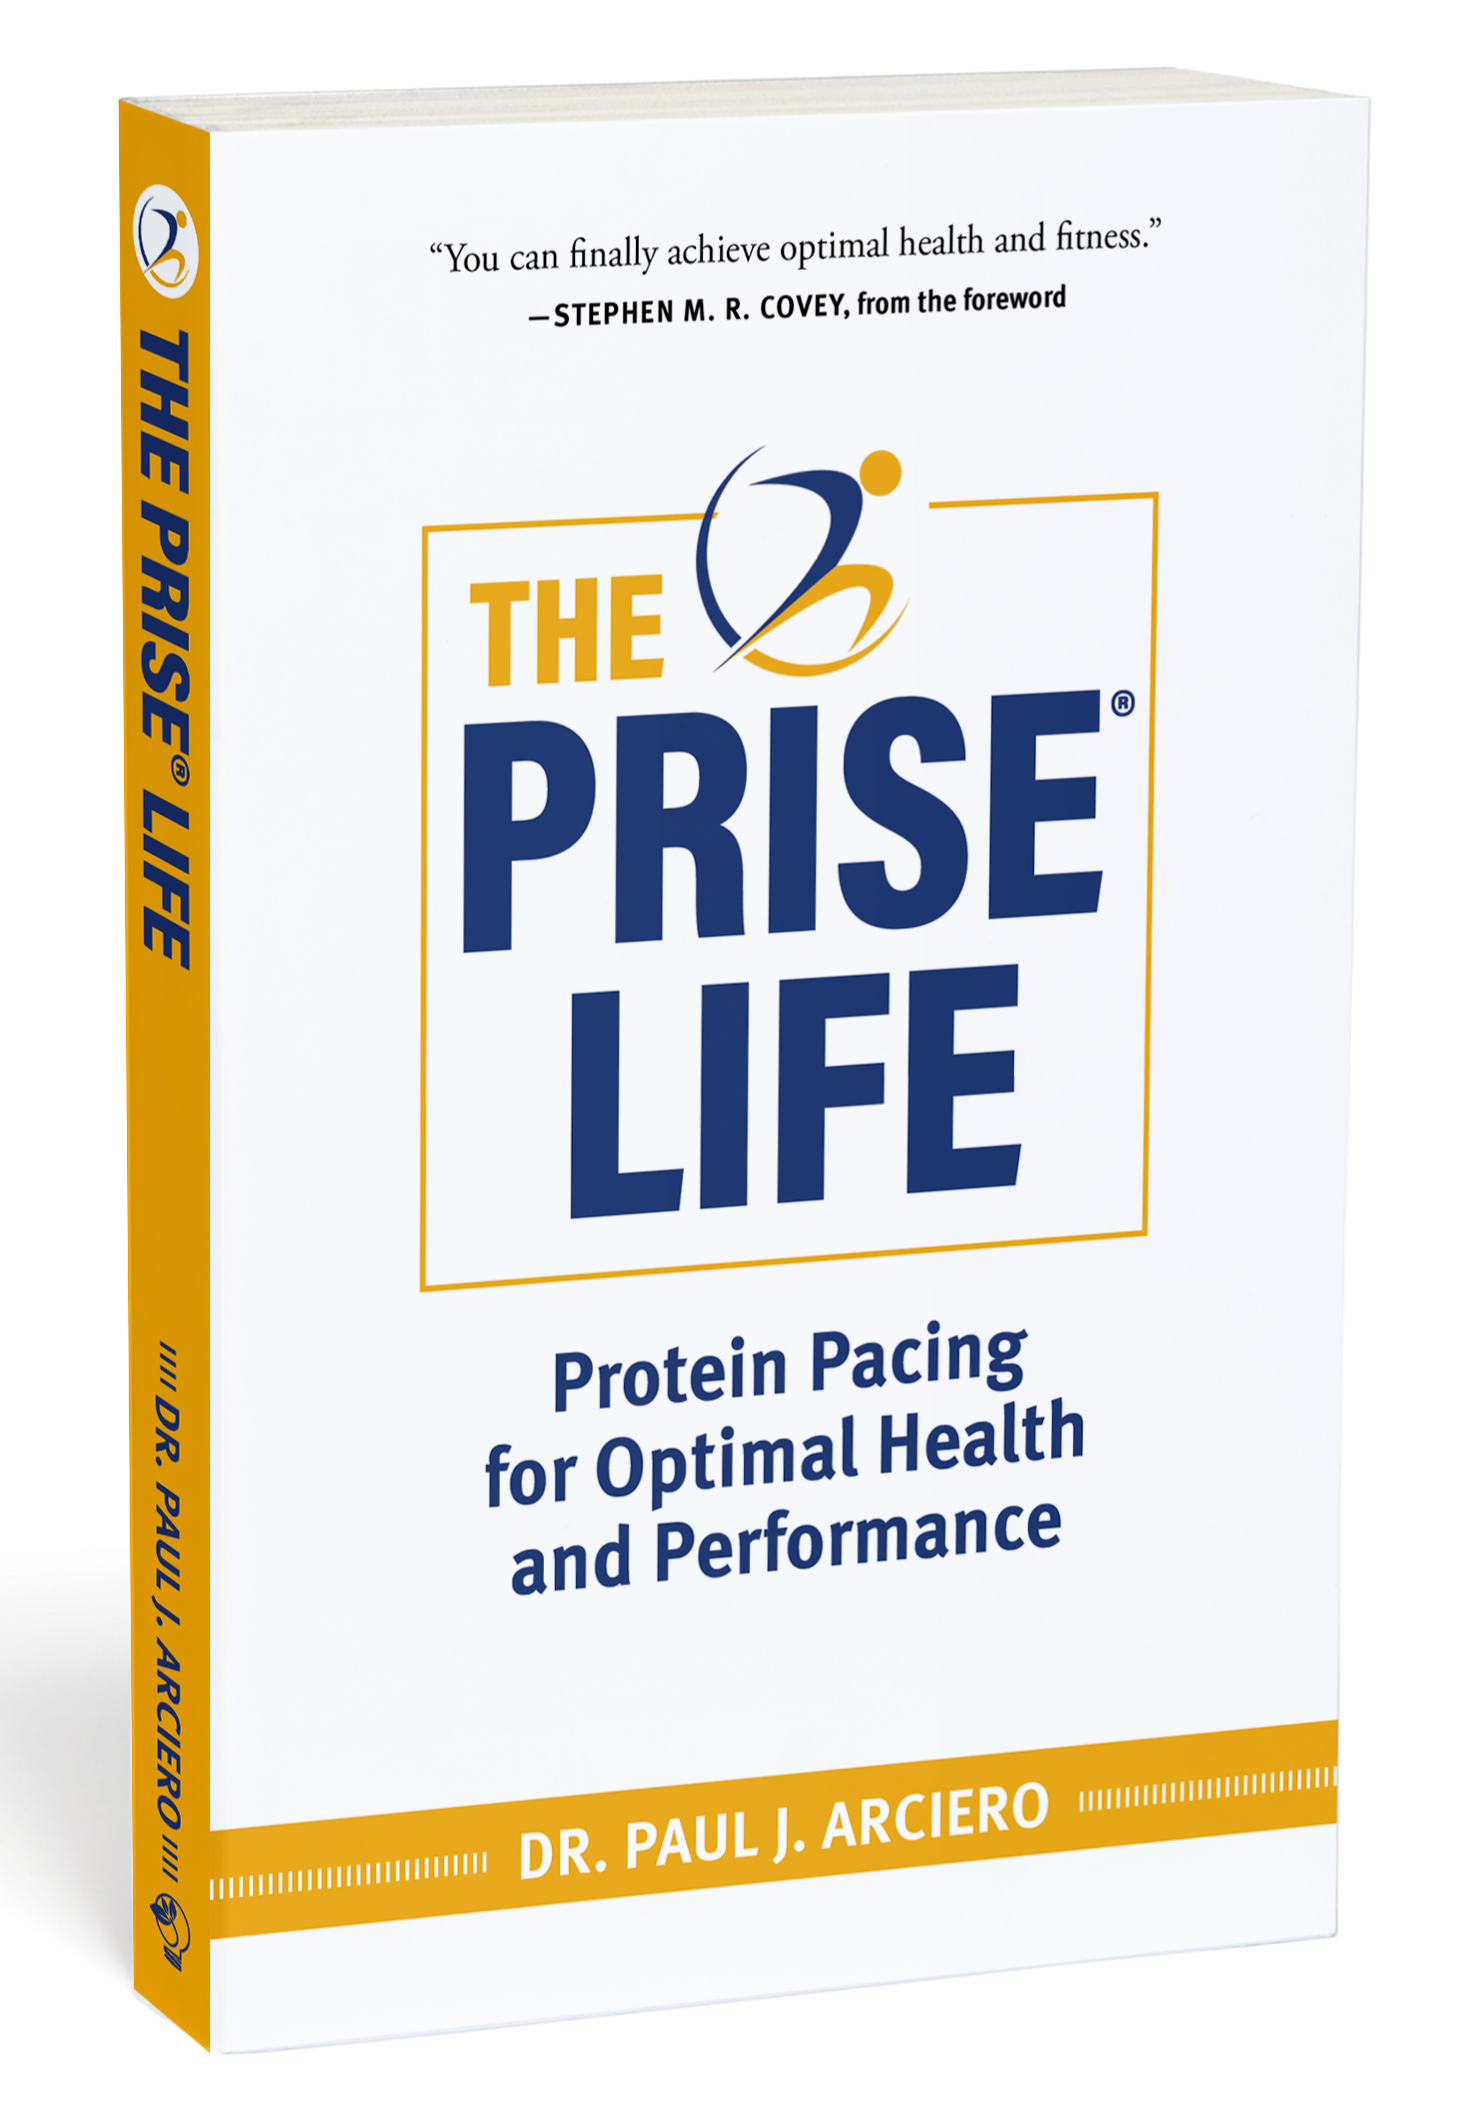 prise life book launches